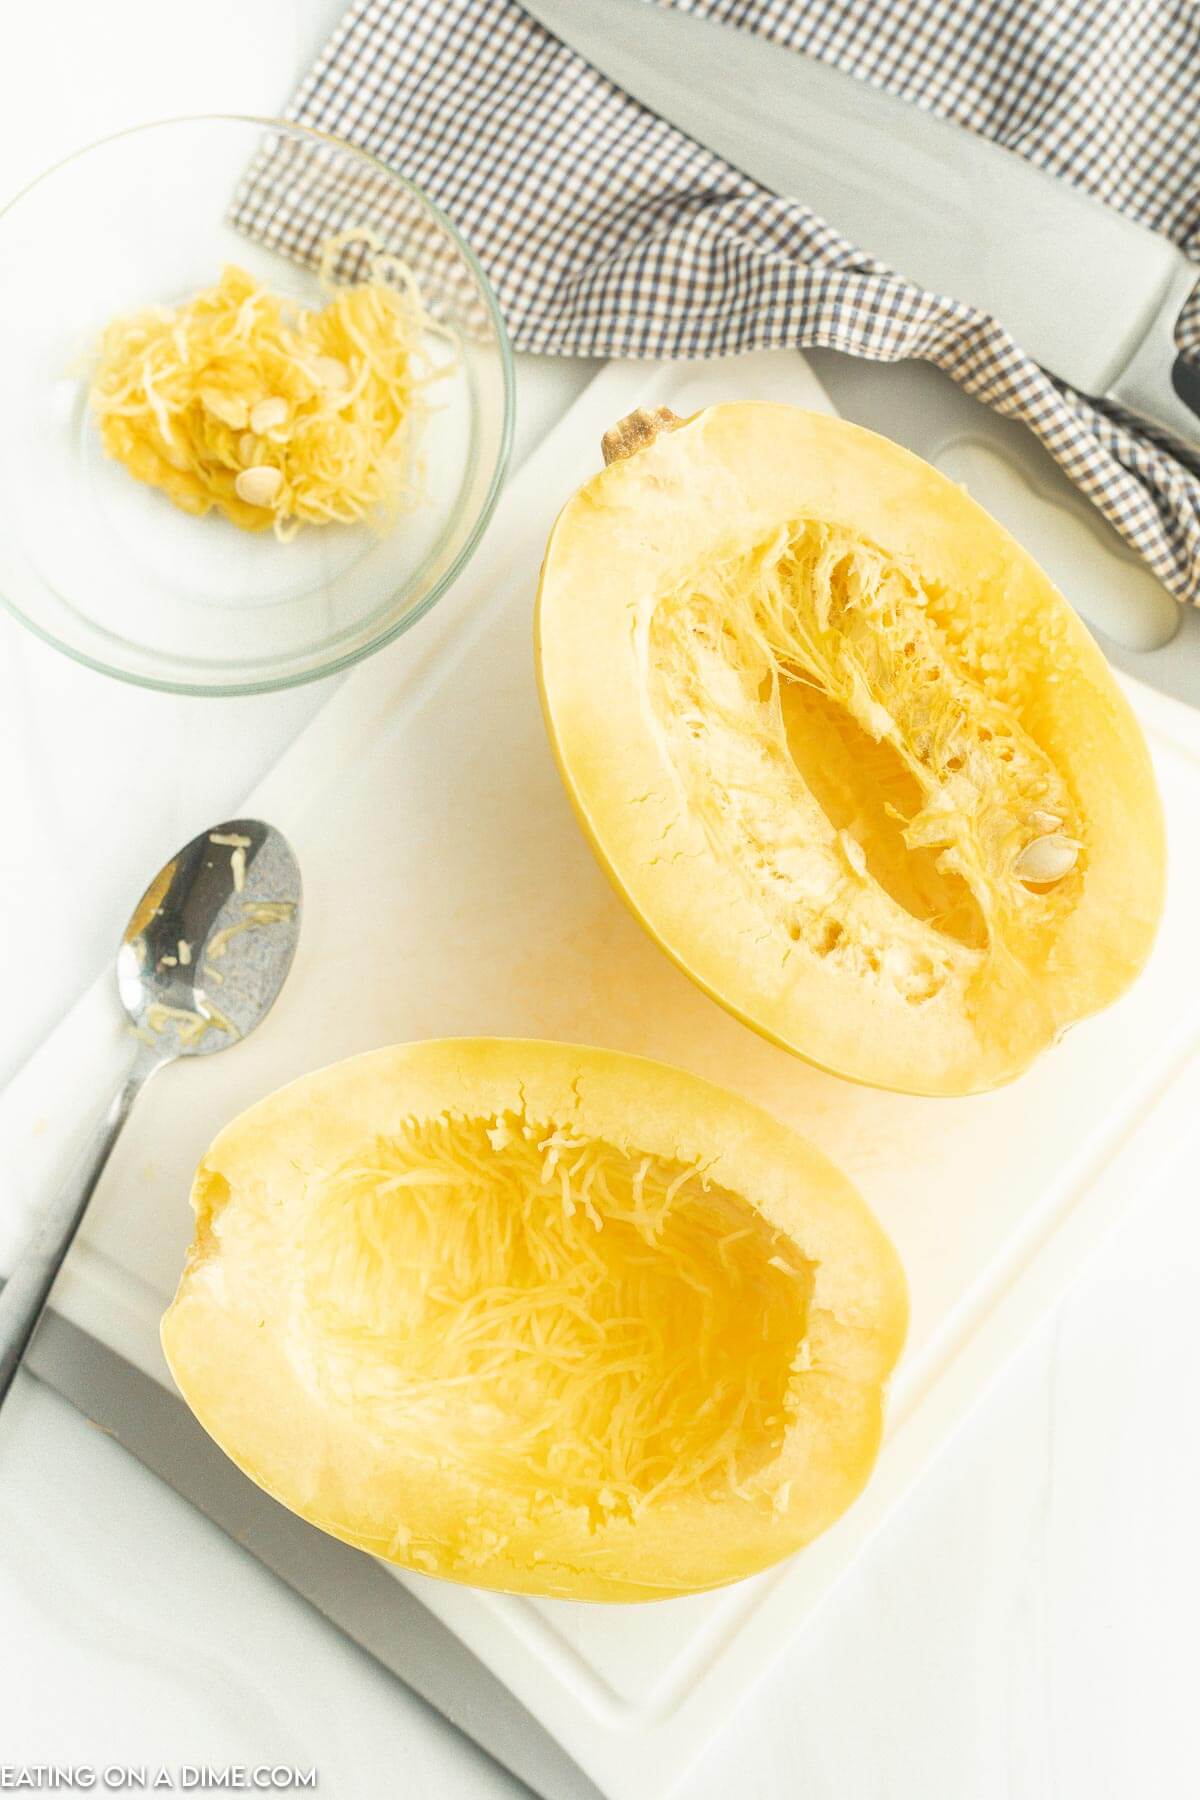 Removing the seeds from the spaghetti squash